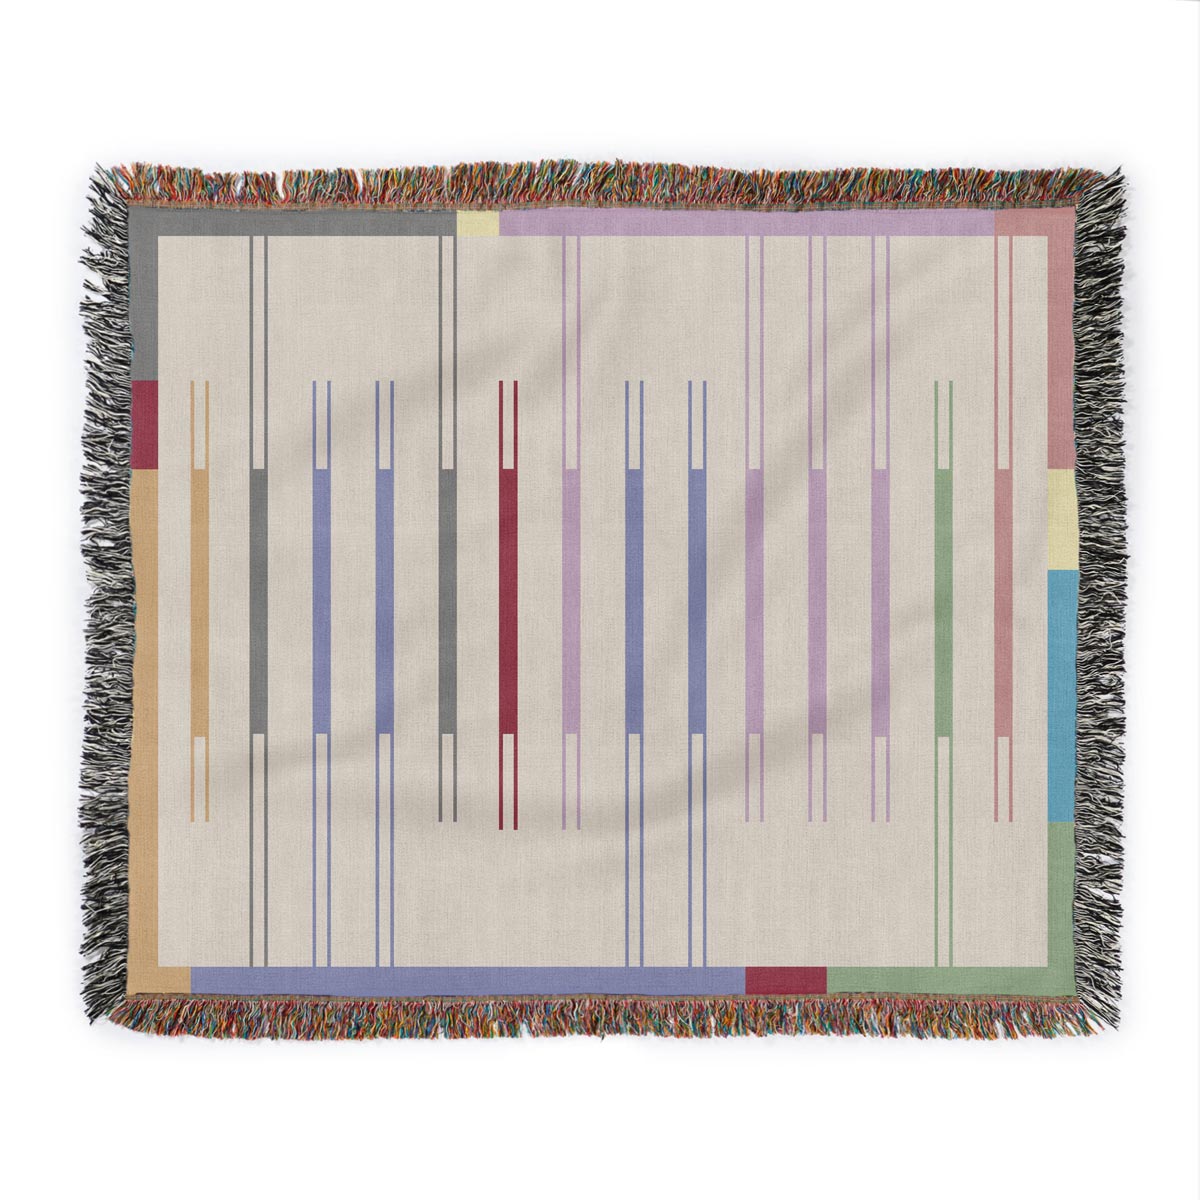 Fula I (dawn) – off-white woven throw blanket with colorful striped elements